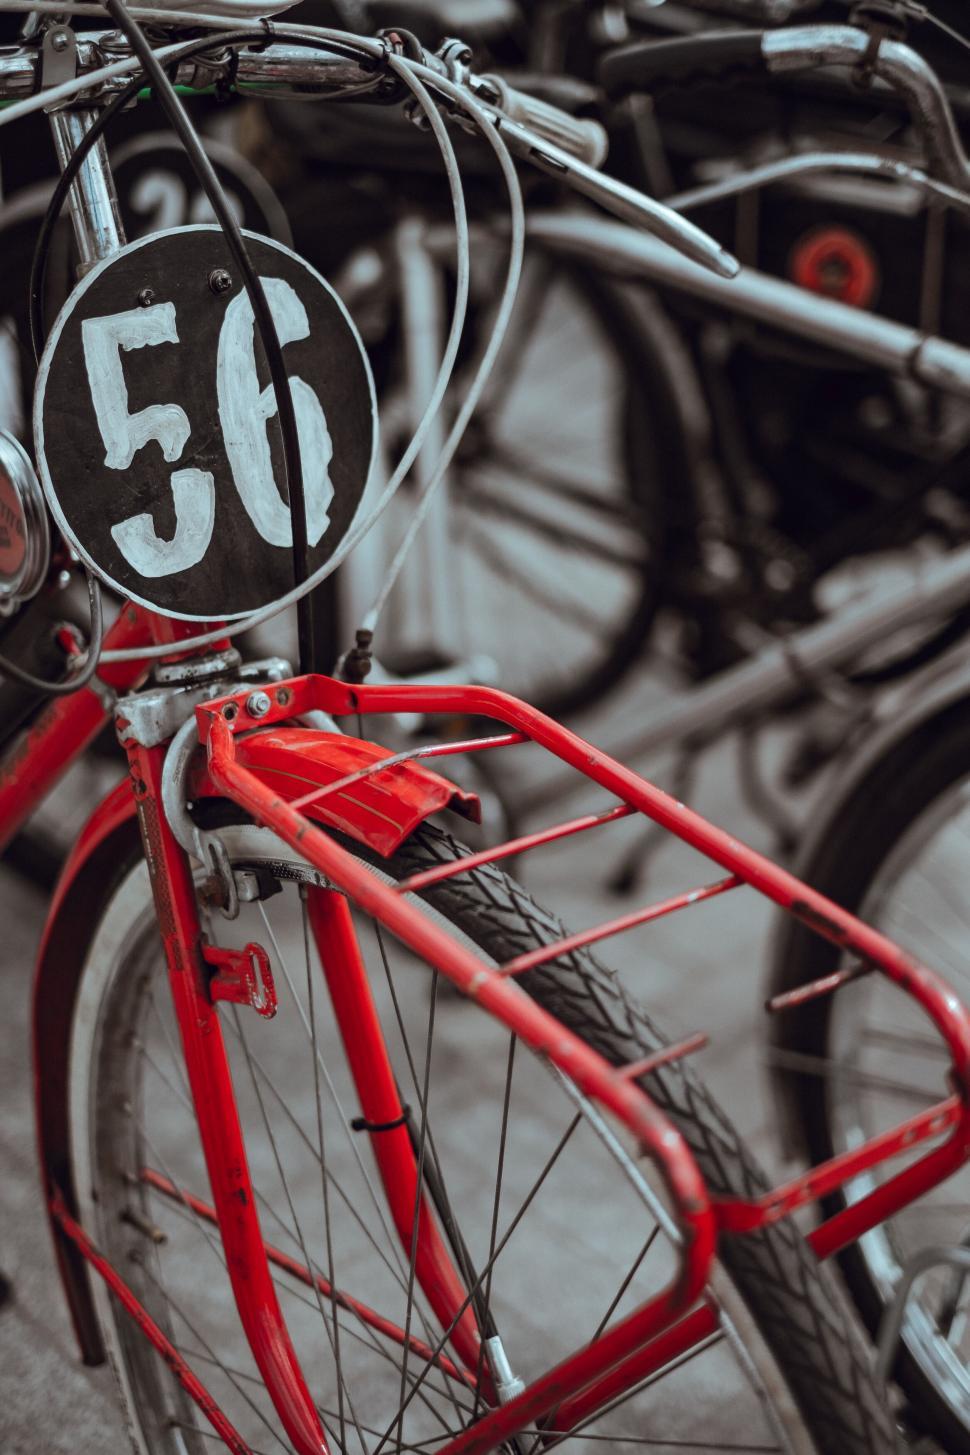 Free Image of Vintage red bicycle with number plate 50 